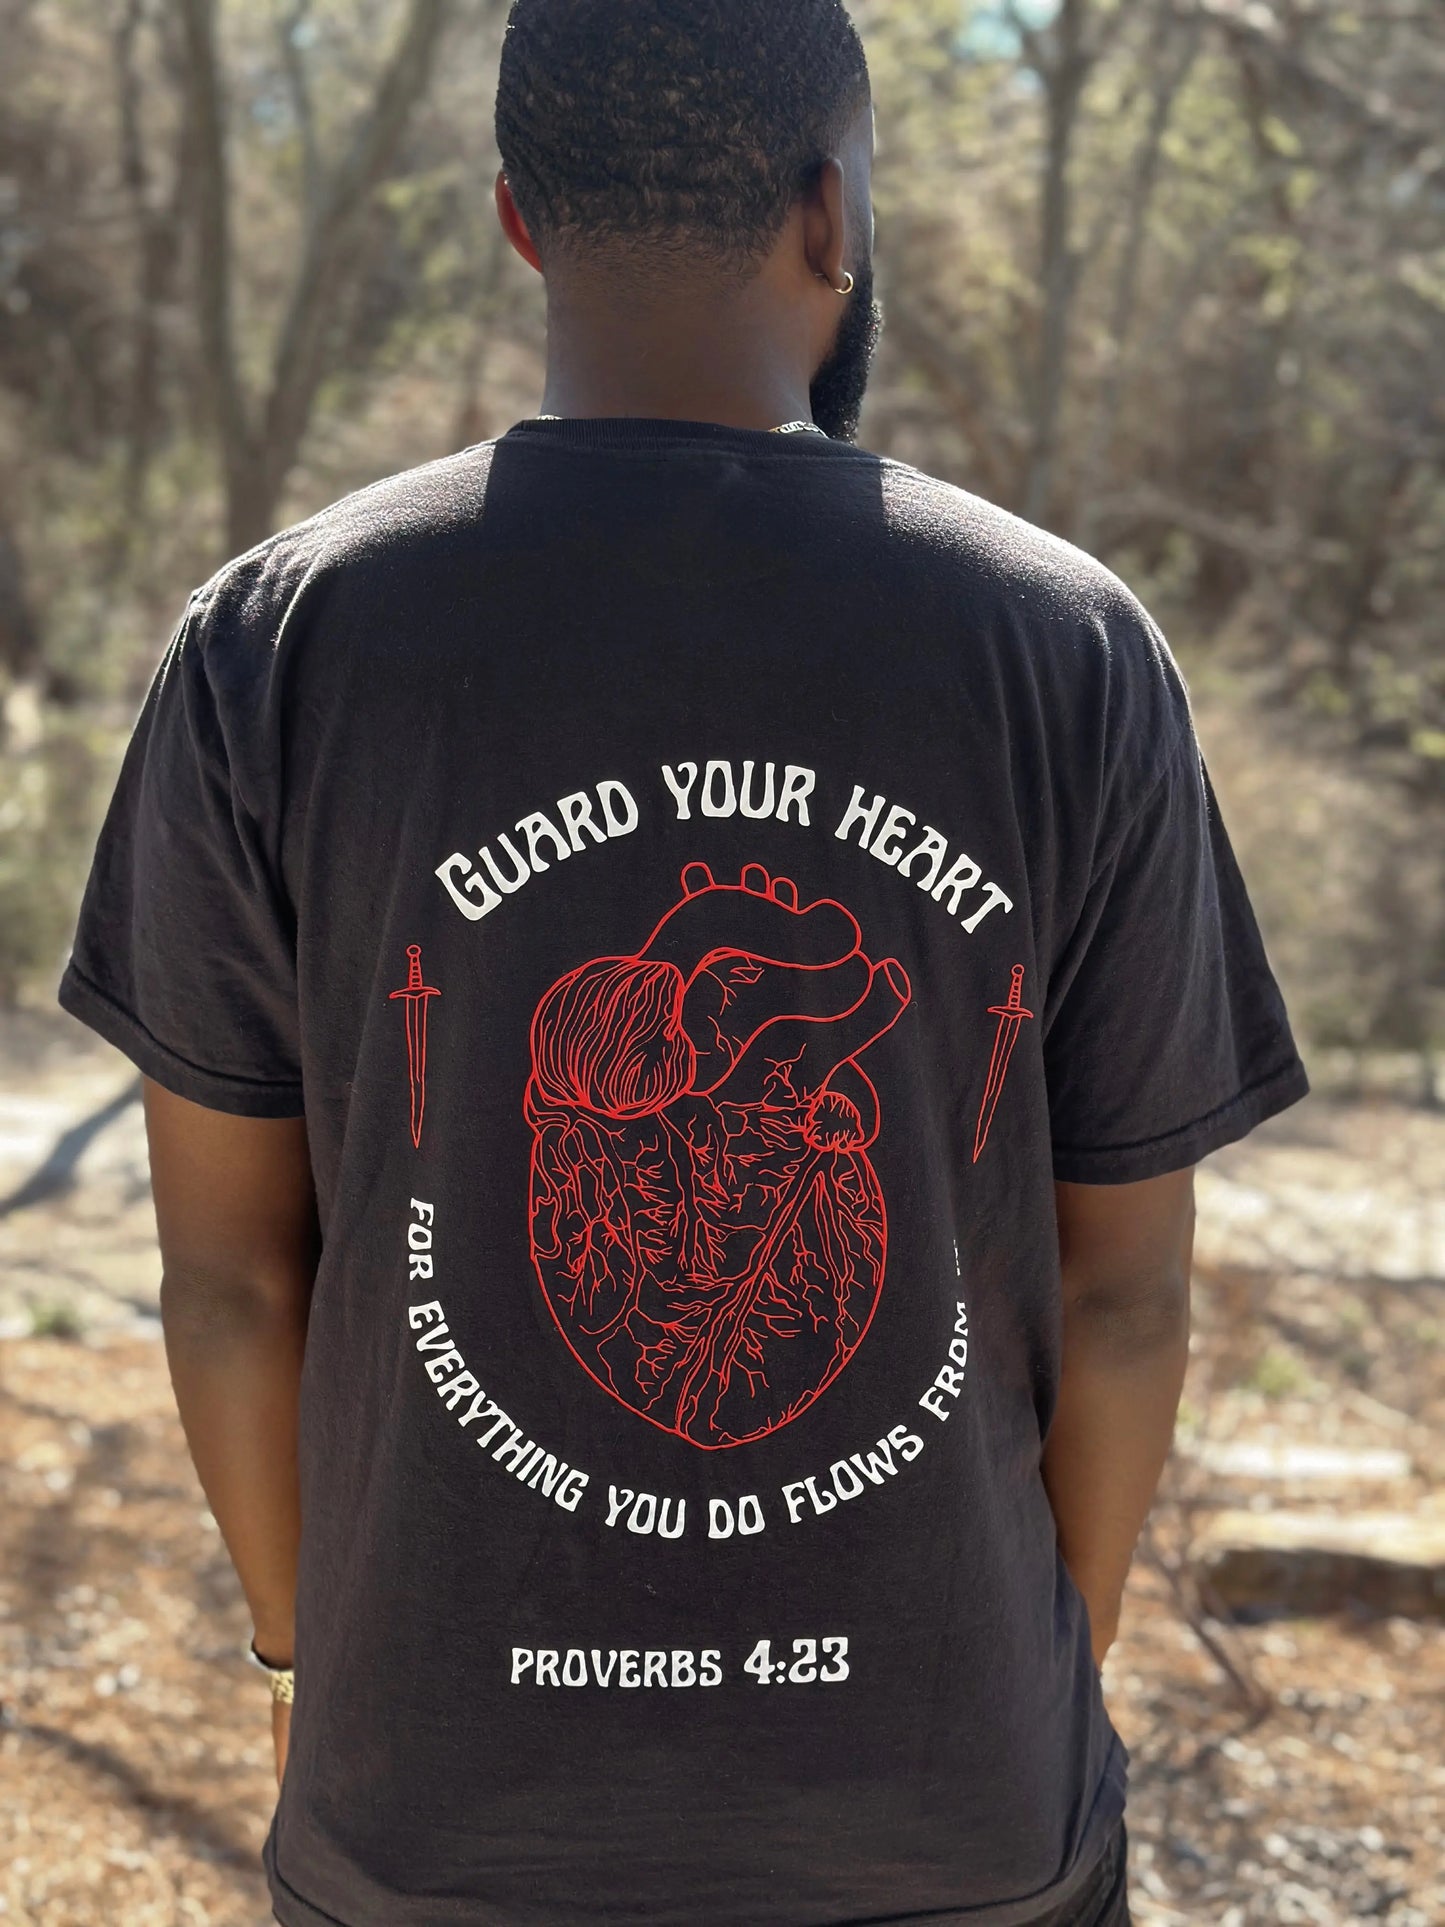 Guard your heart Tshirt. Red Heart T-shirt with swords on it and the verse Proverbs 4:23. Proverbs 4:23 Tshirt. Proverbs 4:23 Tshirt. Proverbs 4:23 black t-shirt from Crown of Favor. Crown of Favor guard your heart. For everything you do flows from it. . Christian clothing brand